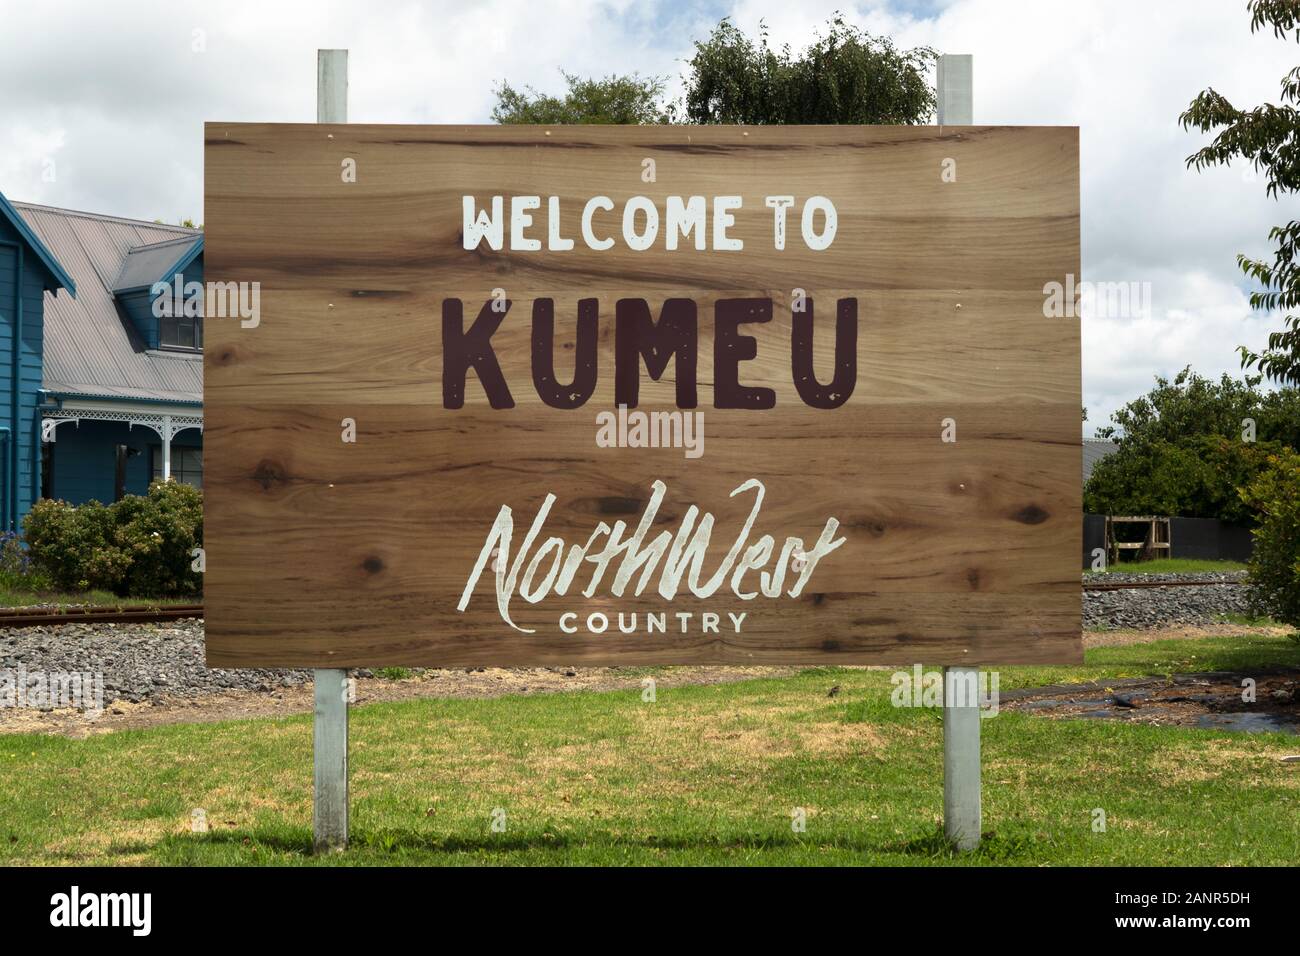 Kumeu, Auckland, New Zealand, Welcome to Kumeu Northwest country wooden road sign, film studios, indoor water tank, avatar, the meg, lord of the rings Stock Photo